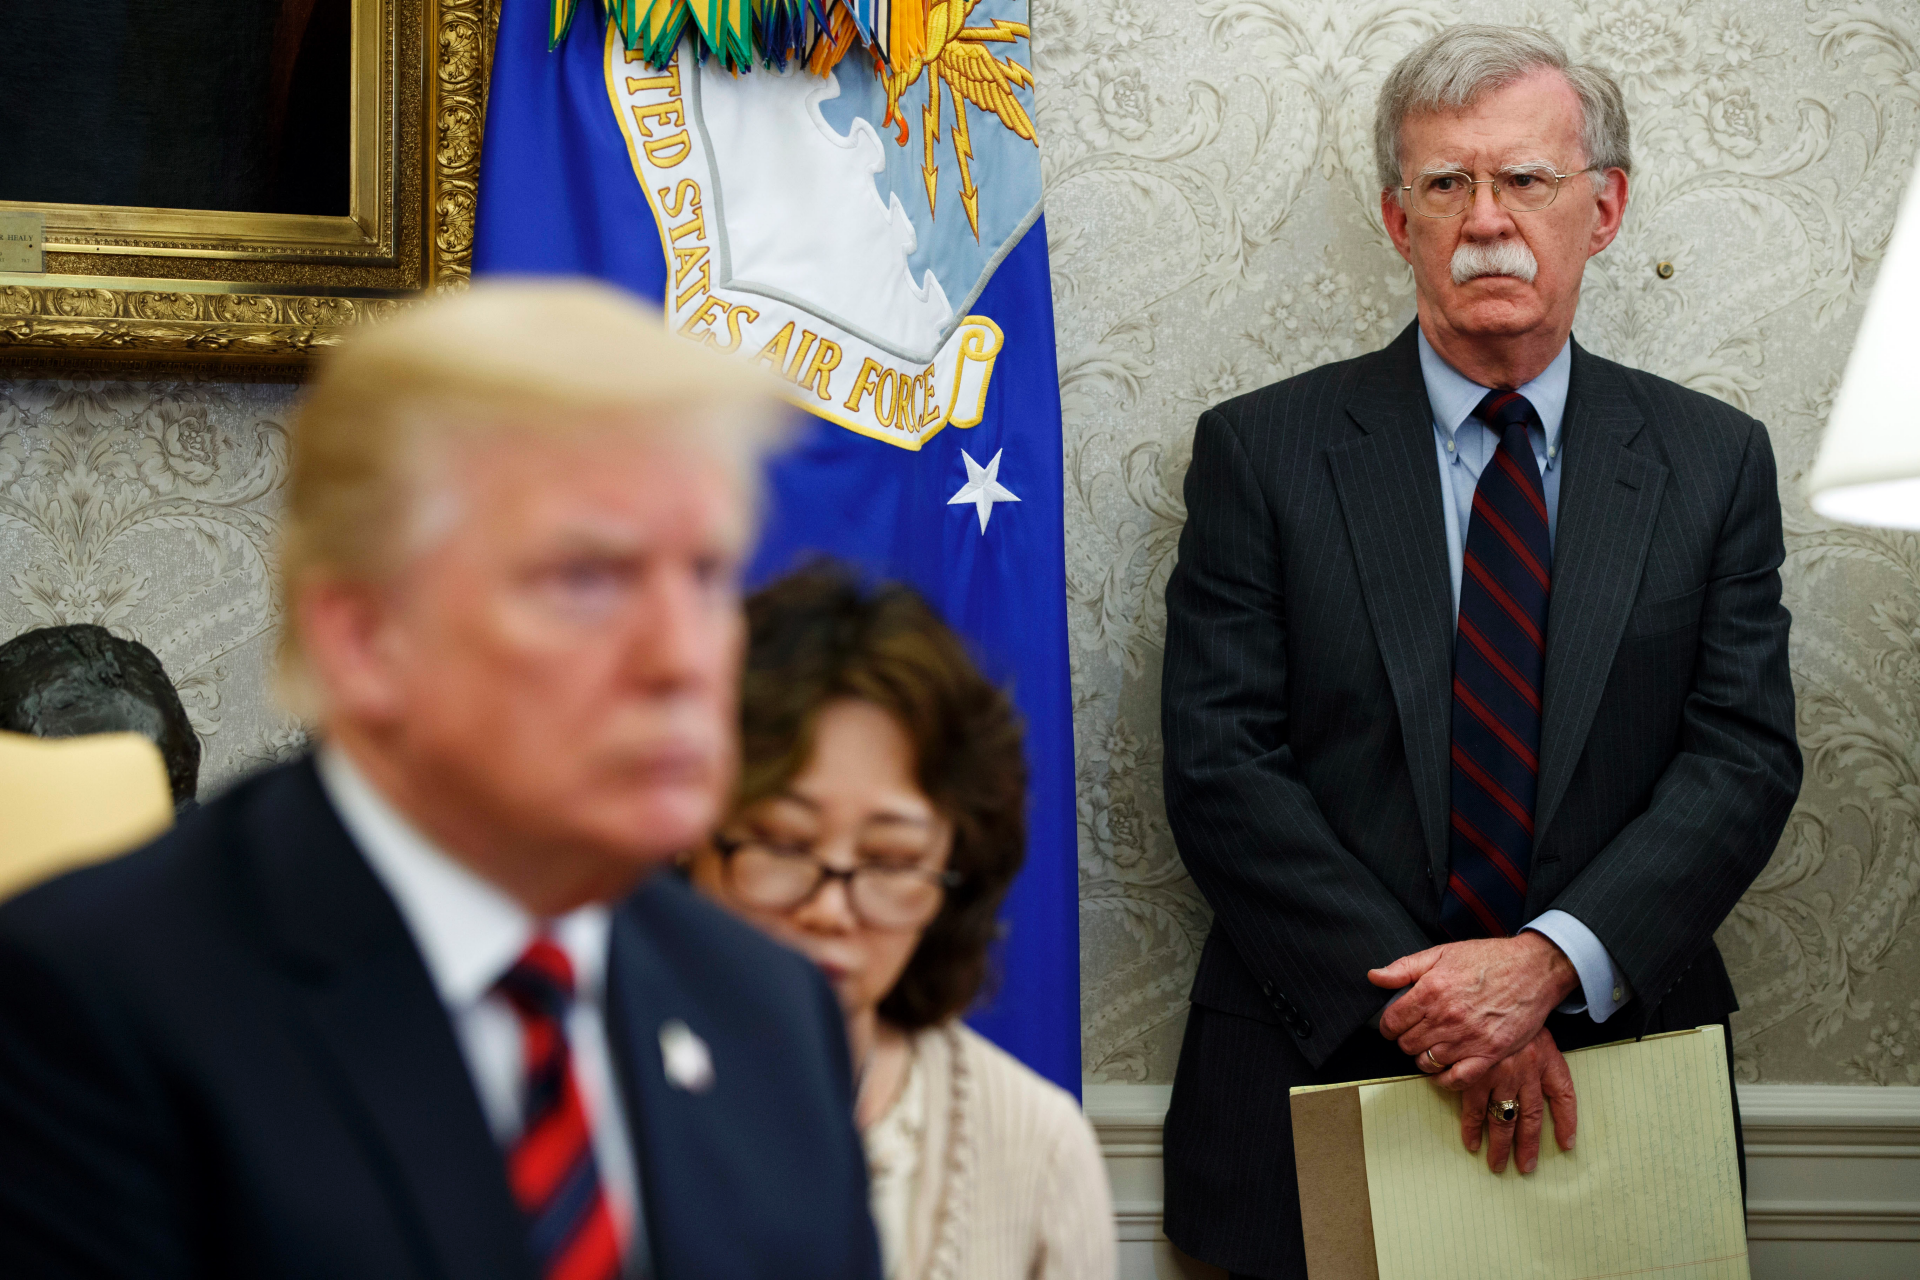 FOX NEWS: John Bolton criticizes Trump's North Korea strategy in first speech since White House exit